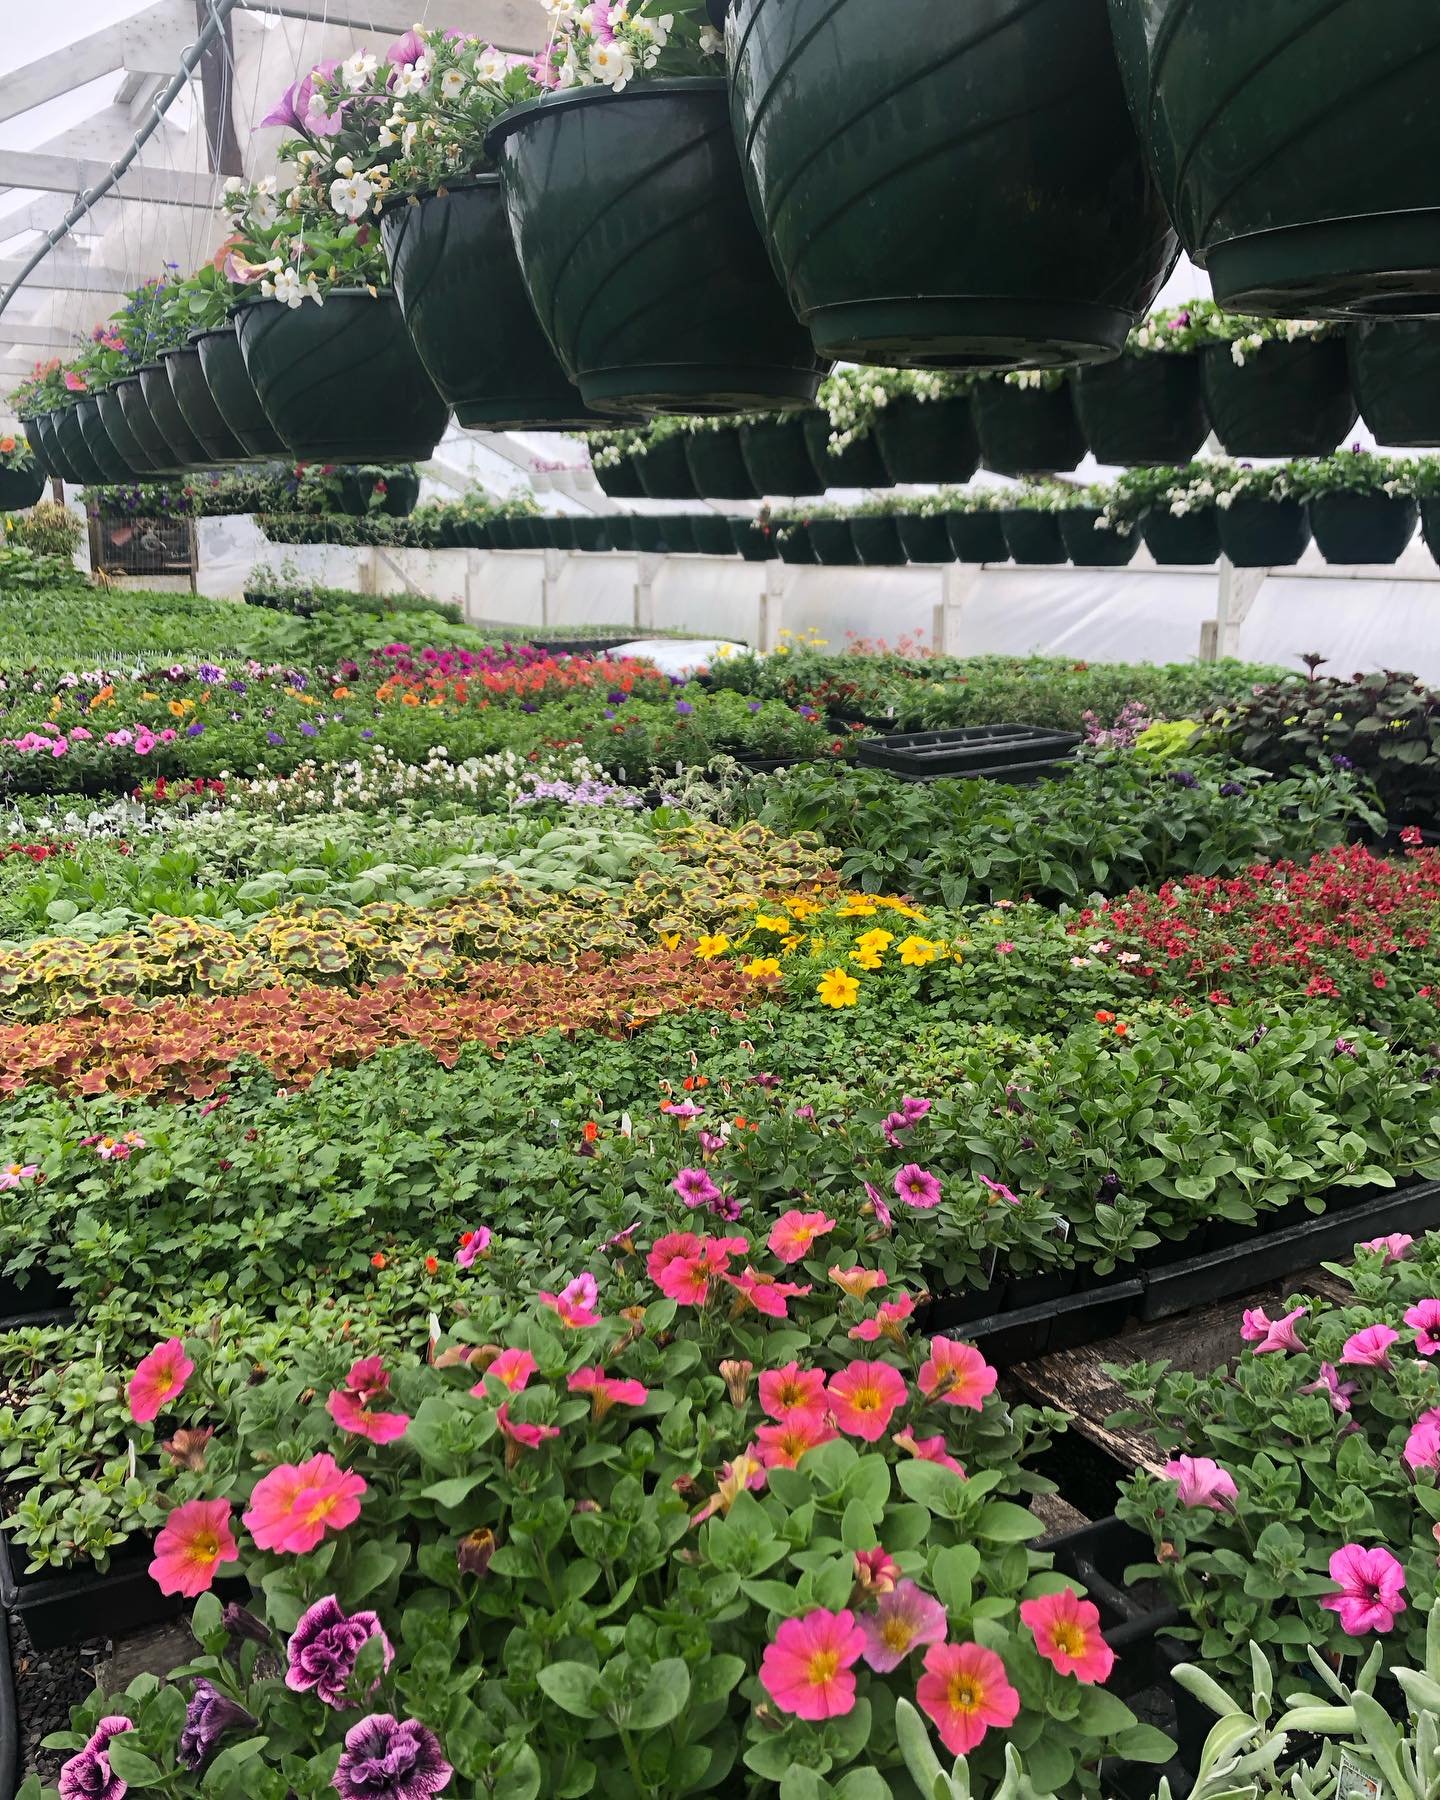 You are invited to our Opening Day Party on April 28, 12-5pm!! 

We&rsquo;ll have music thanks to @schmidty.music and friends &hearts;️and refreshments!! 

Oh and did I mention we have plants??!! Greenhouses are full to overflowing and the plant babi